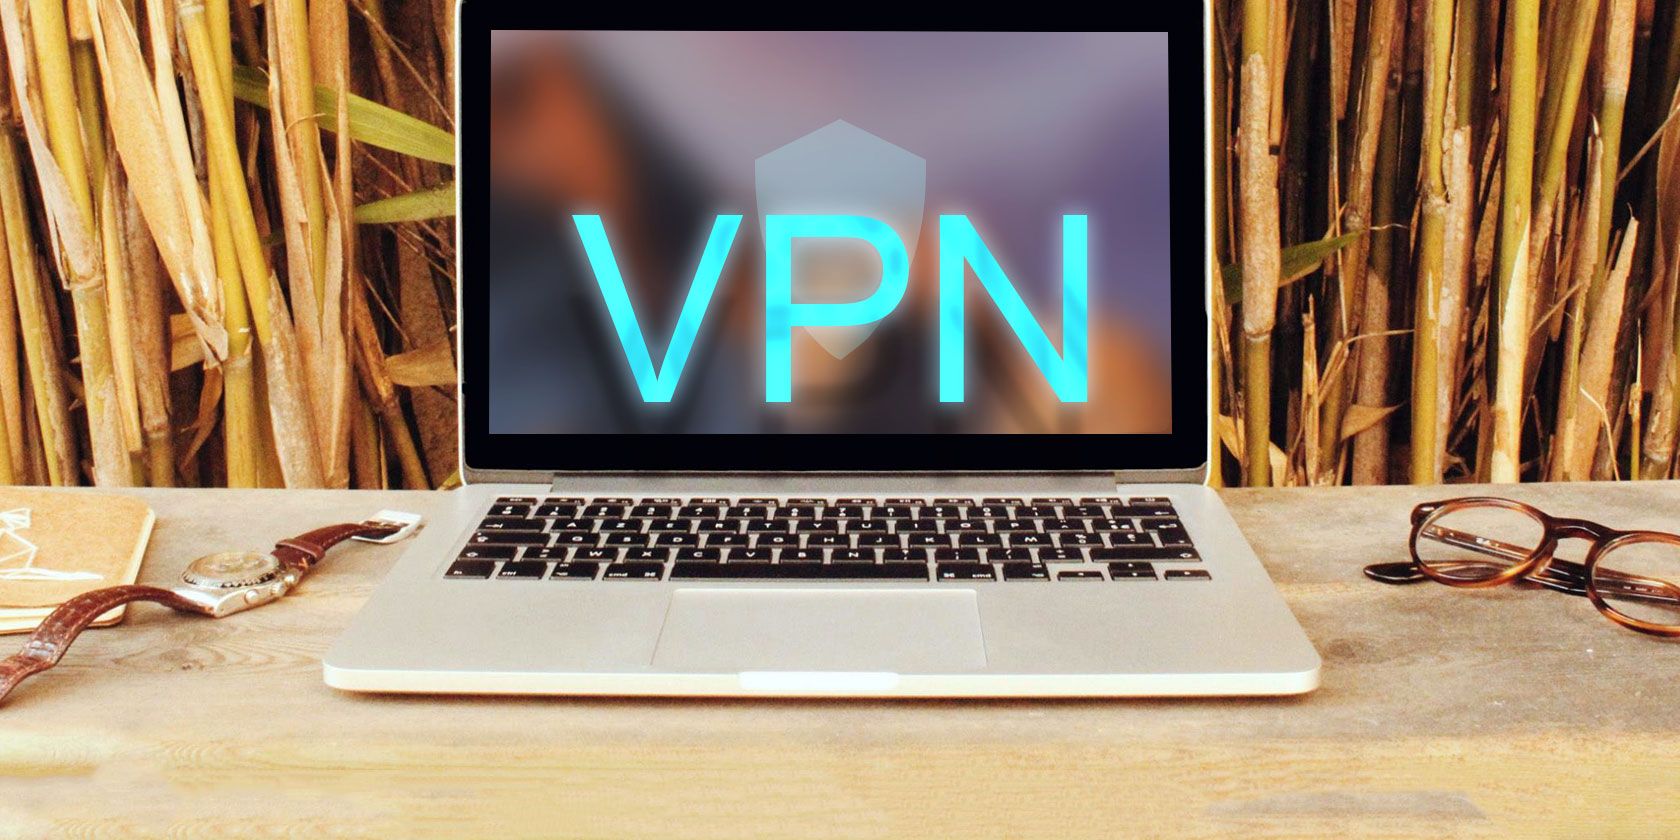 vpn for mac in 2017 for free